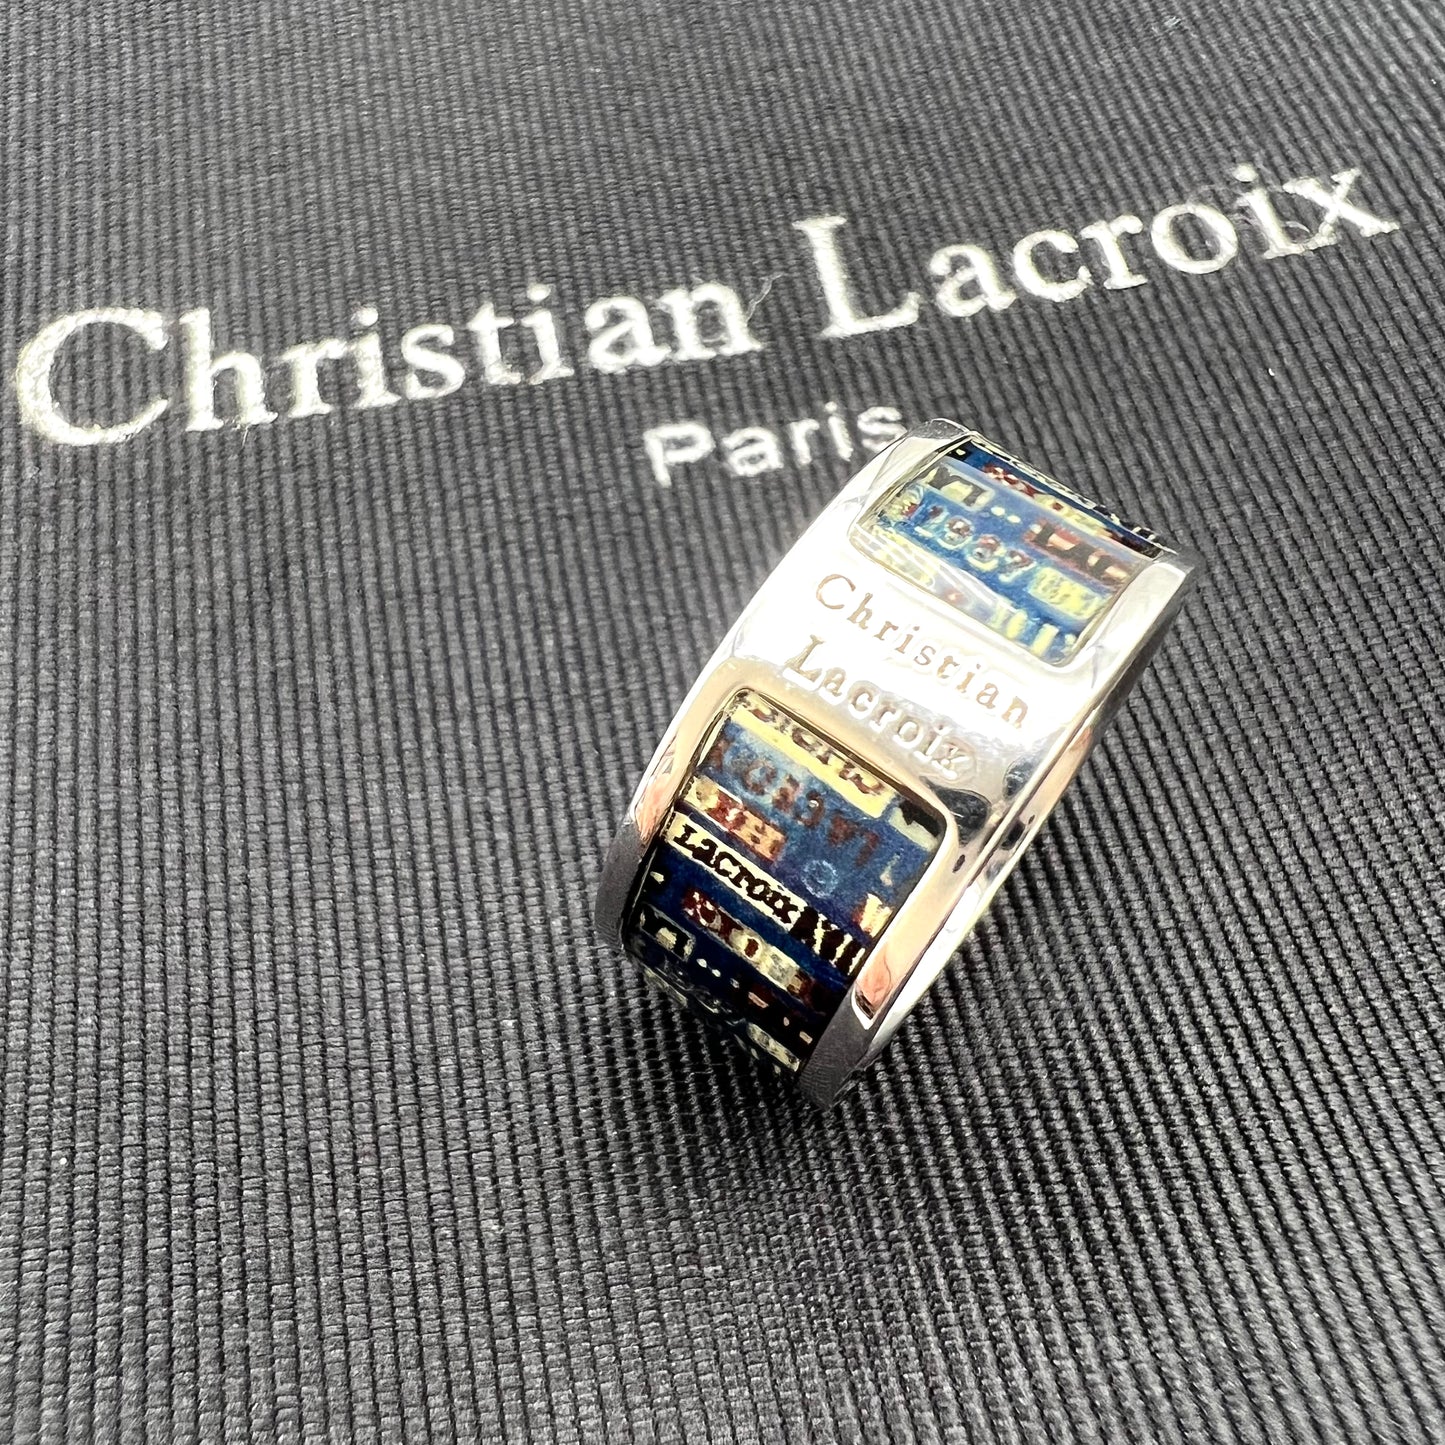 Christian Lacroix Winter Fall 1987 Ring and Bangle Set each in Original Boxes (Future Collectibles)